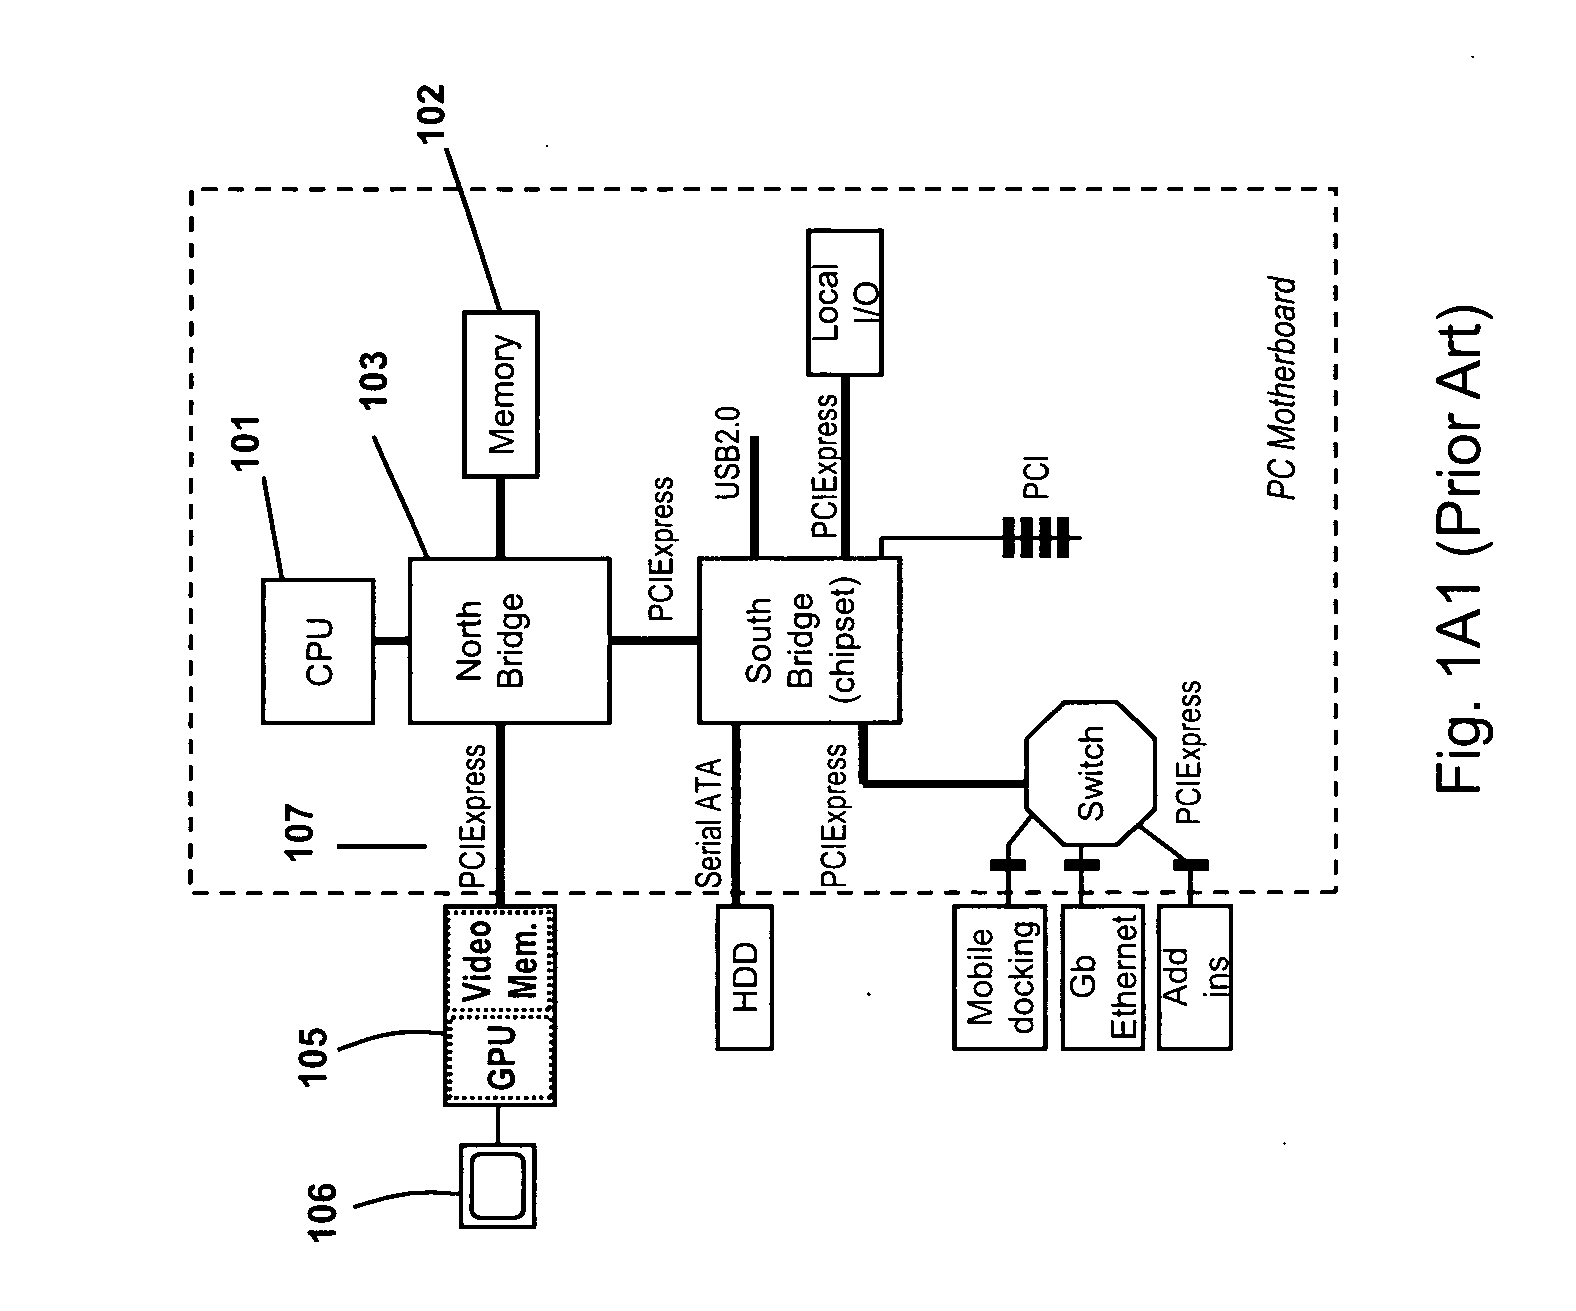 Computing system capable of parallelizing the operation graphics processing units (GPUs) supported on a CPU/GPU fusion-architecture chip and one or more external graphics cards, employing a software-implemented multi-mode parallel graphics rendering subsystem